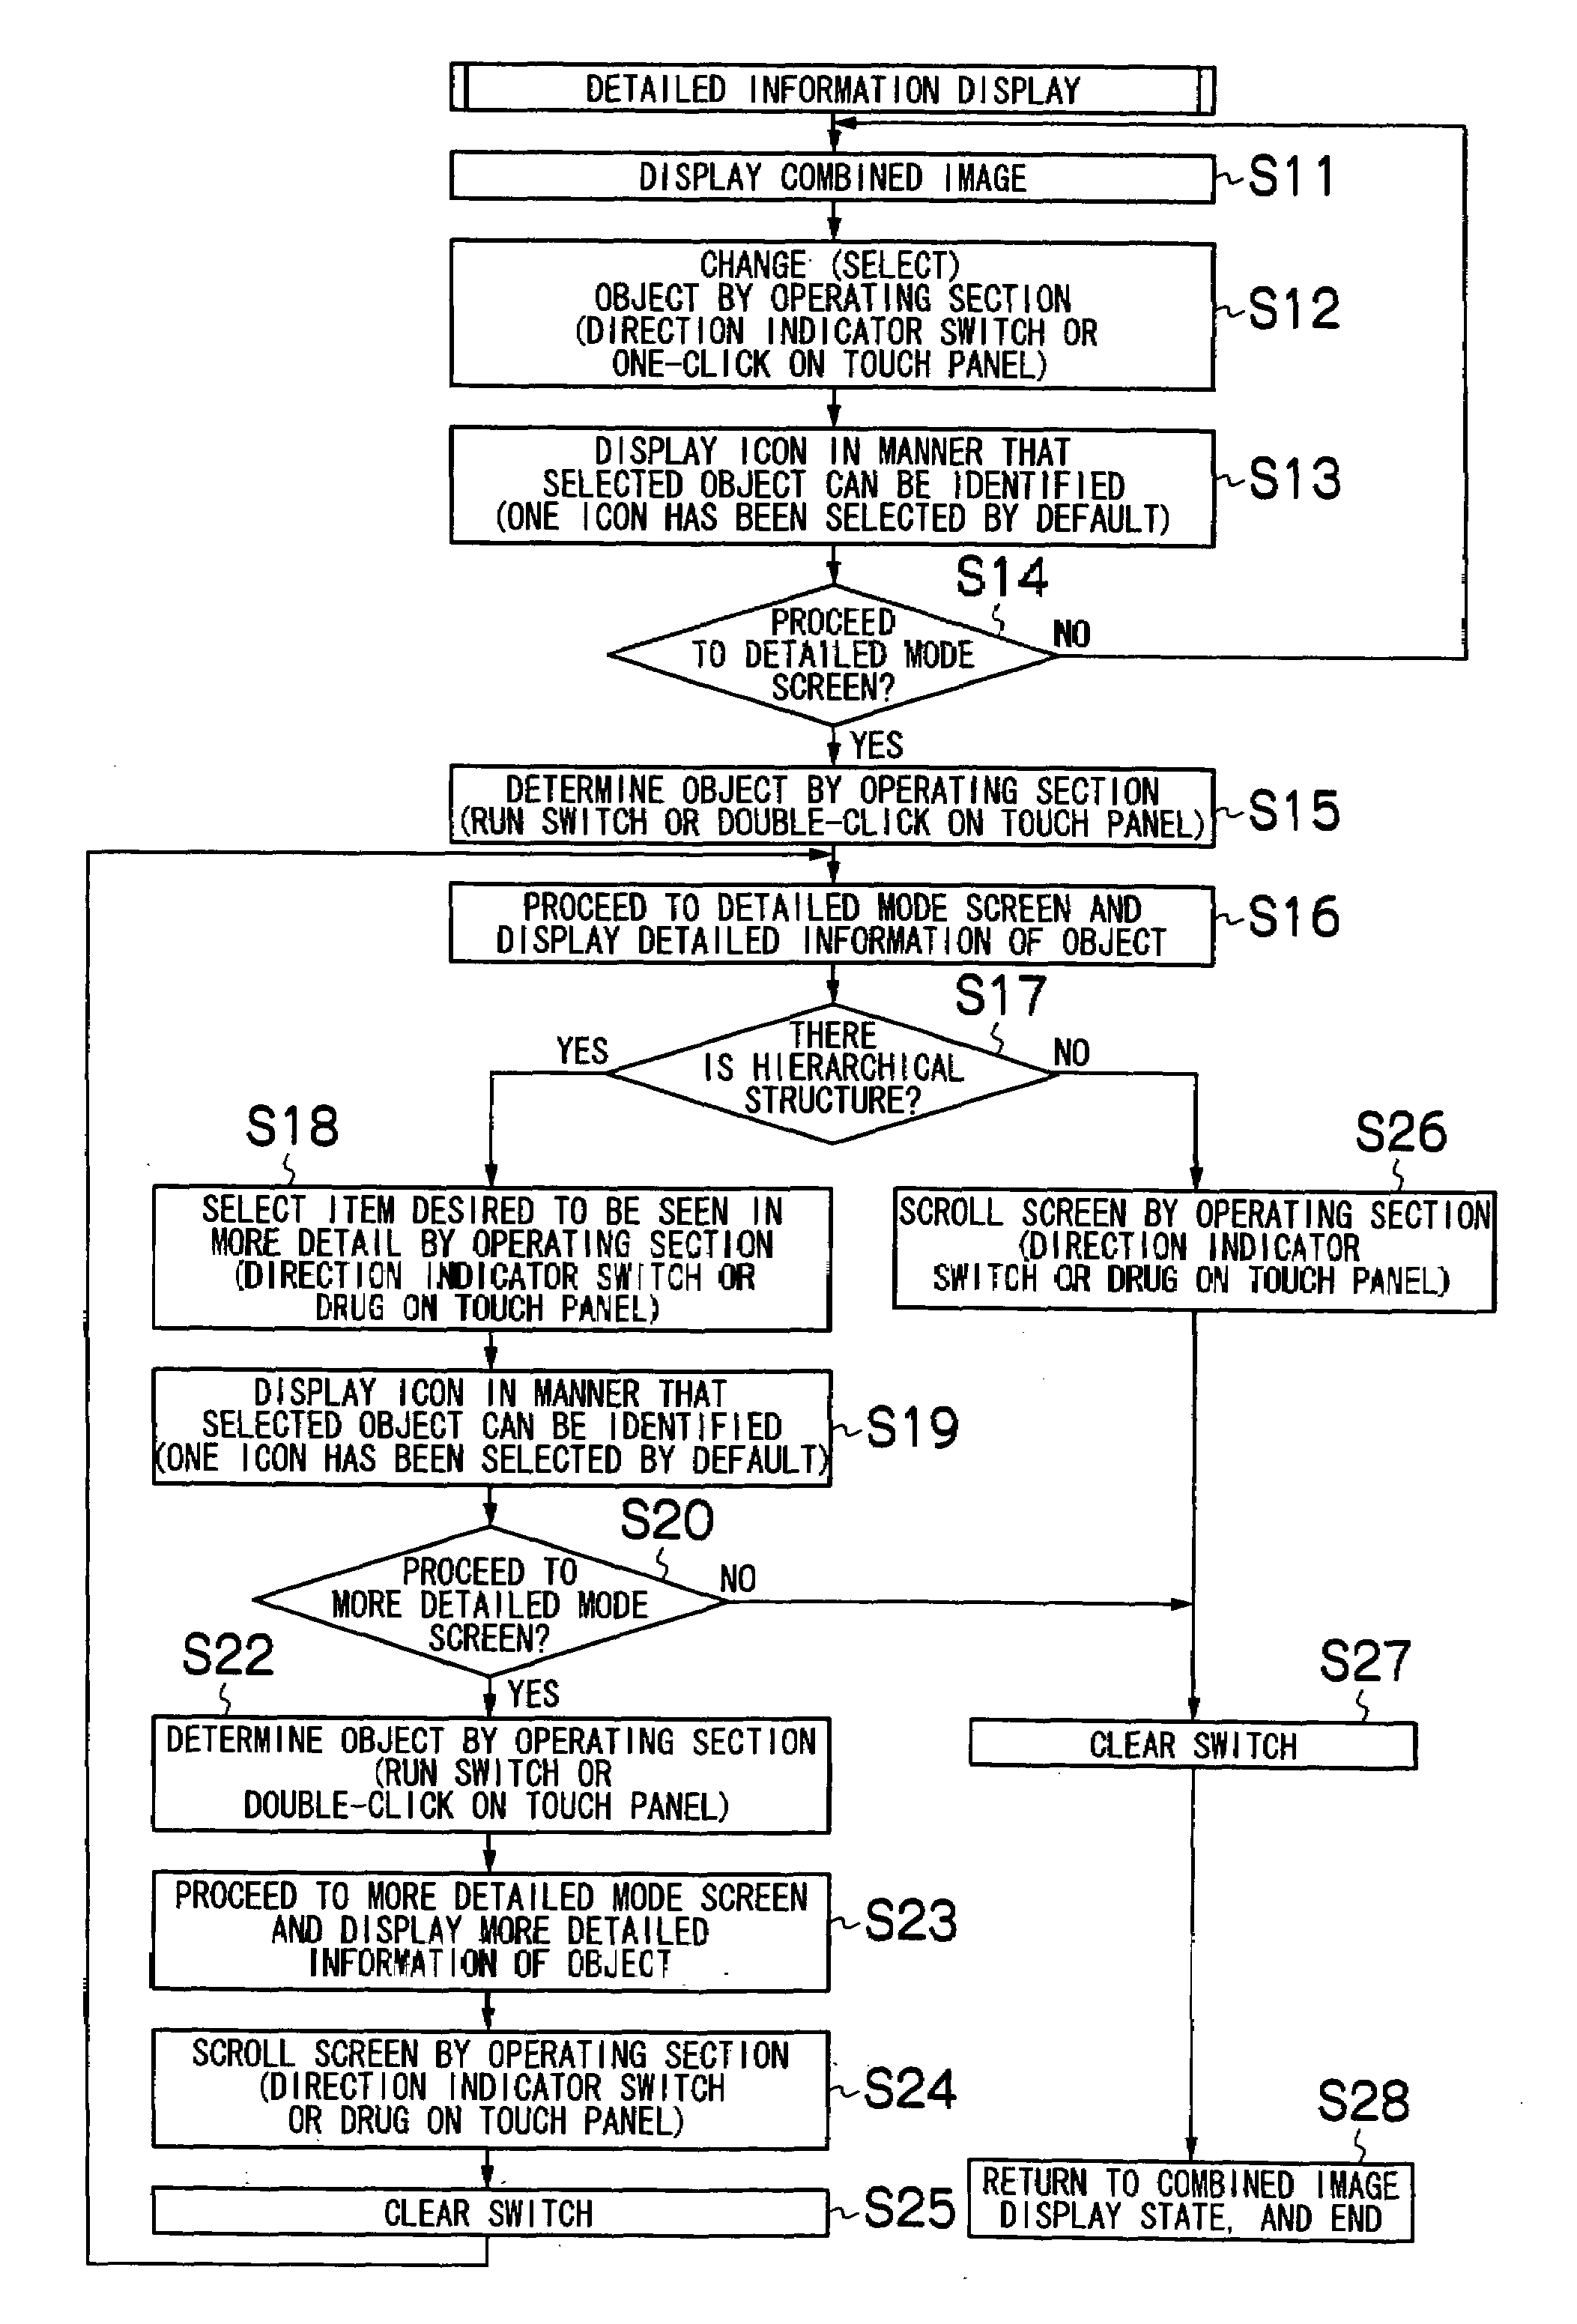 Remote controller, remote control system, and method for displaying detailed information